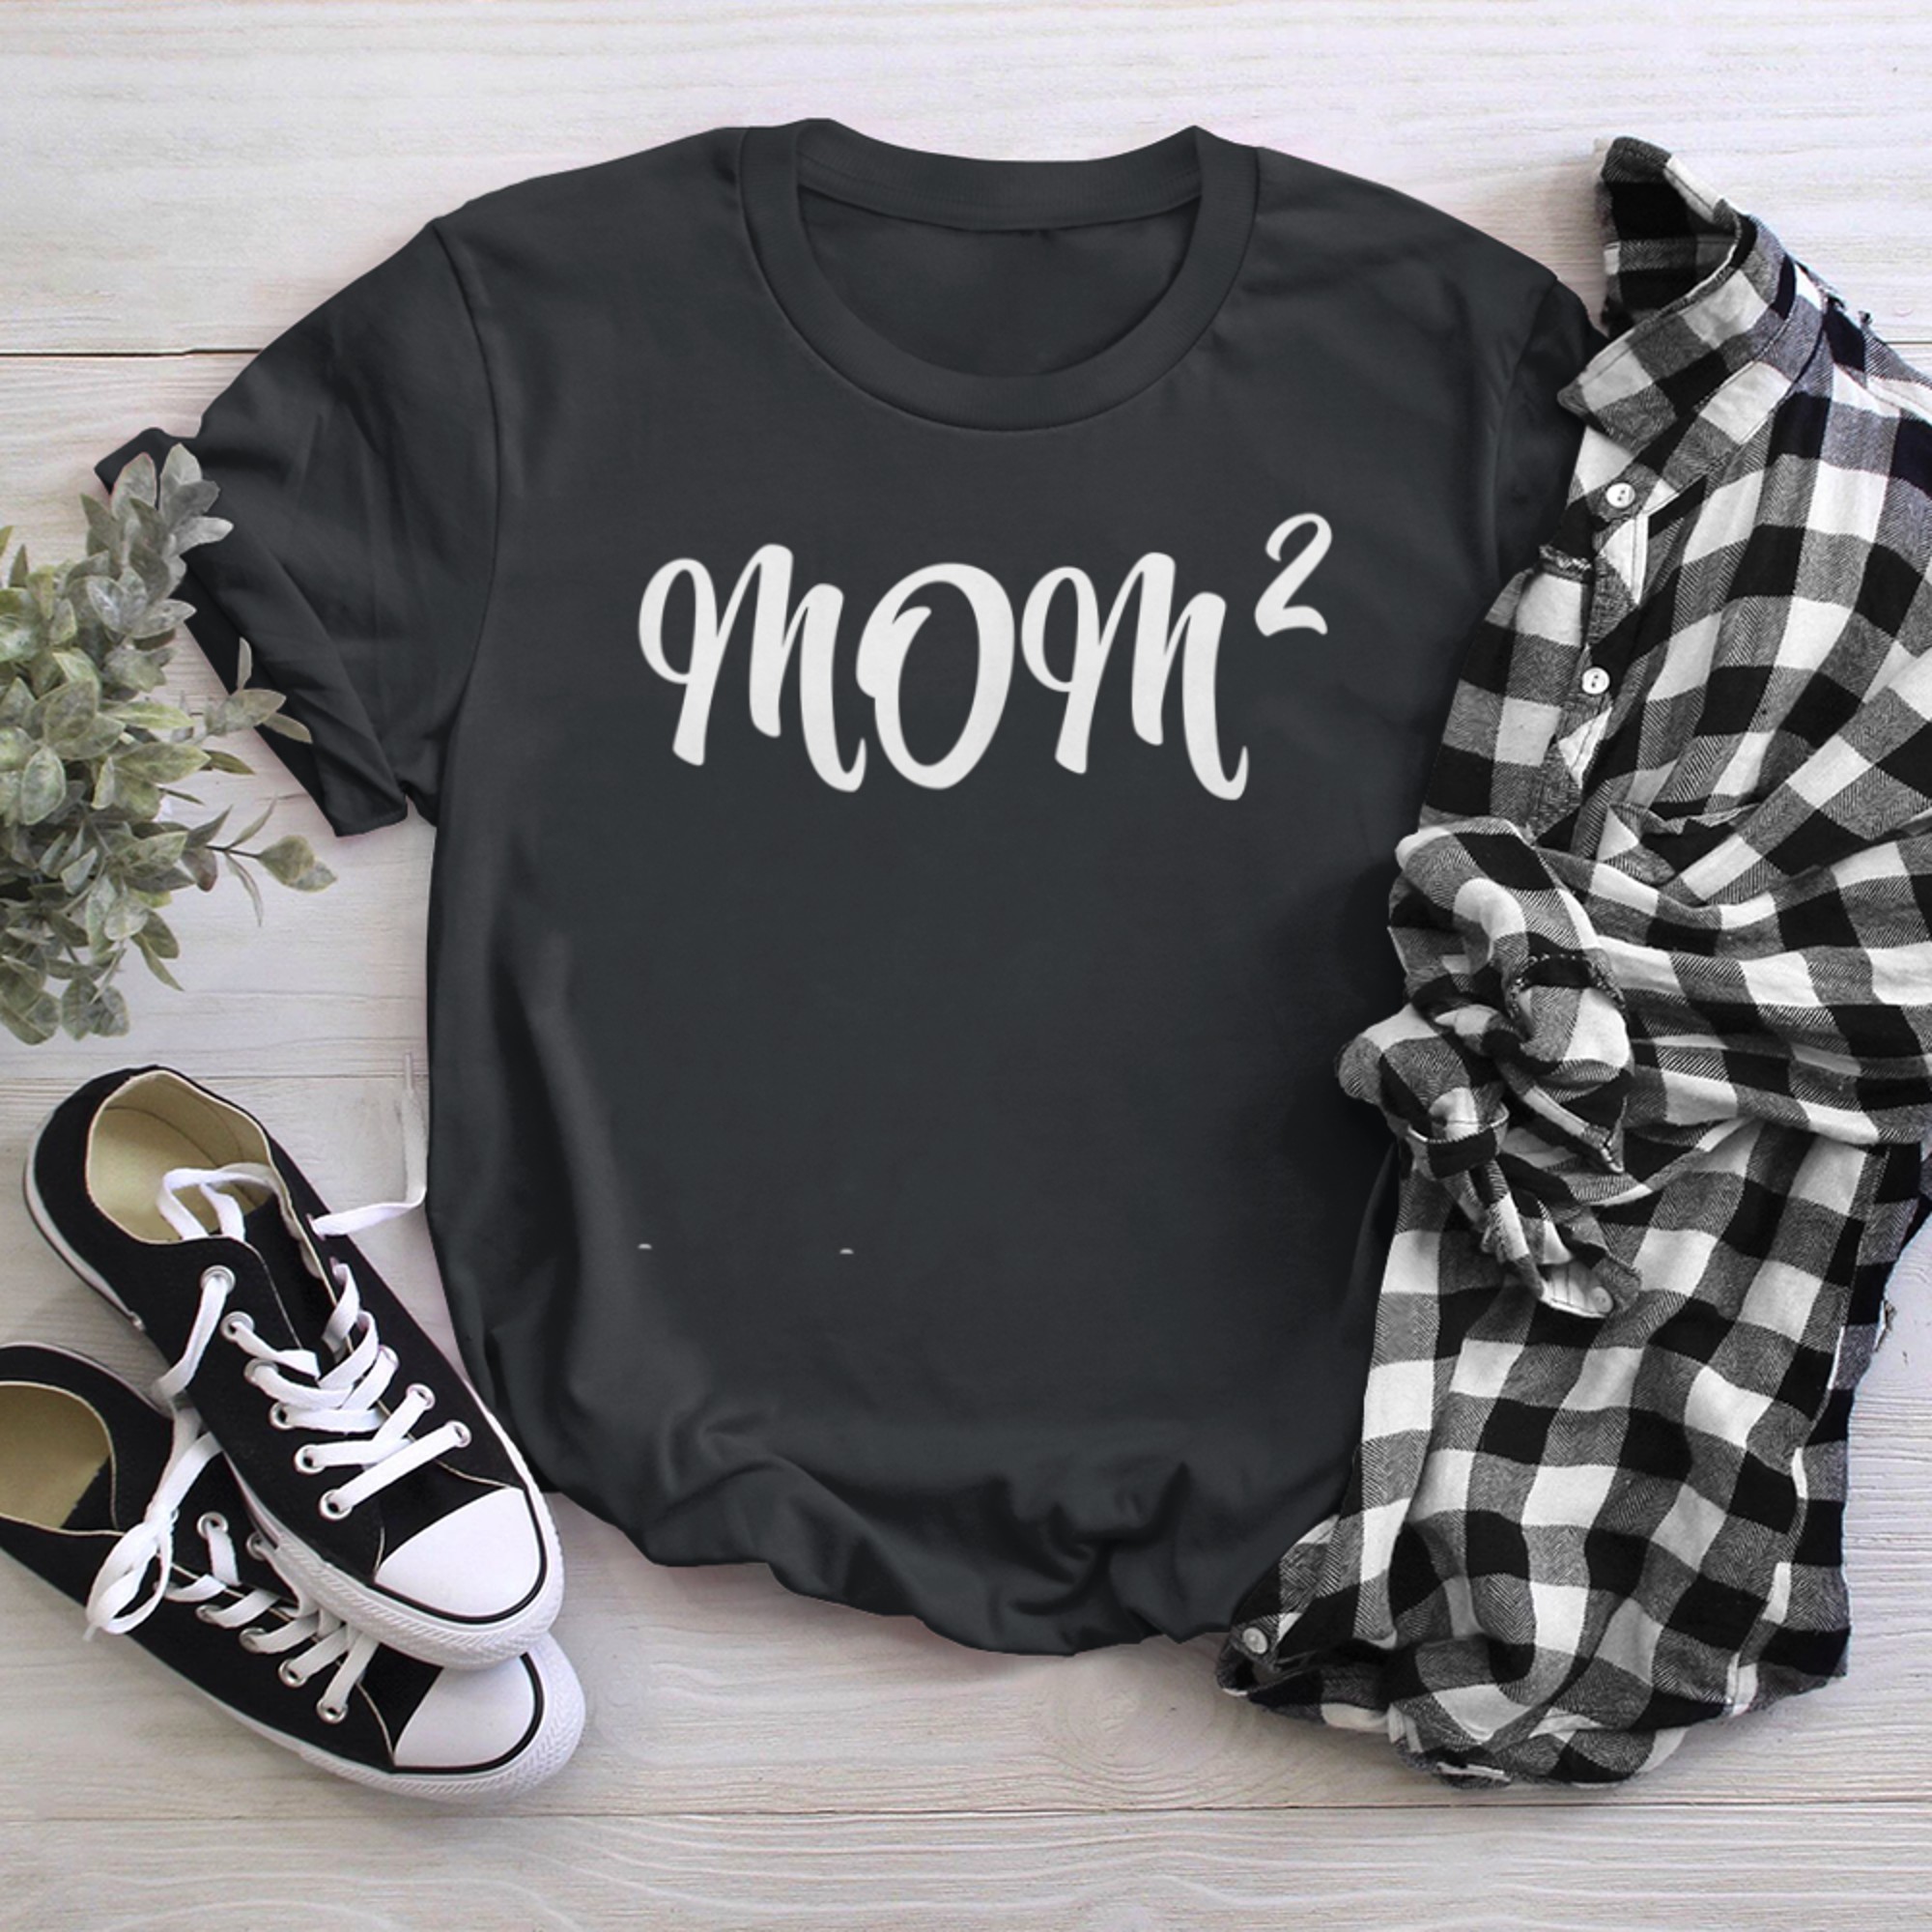 Mom of Two Mother of Two Mom of Twin Mother (1) t-shirt black